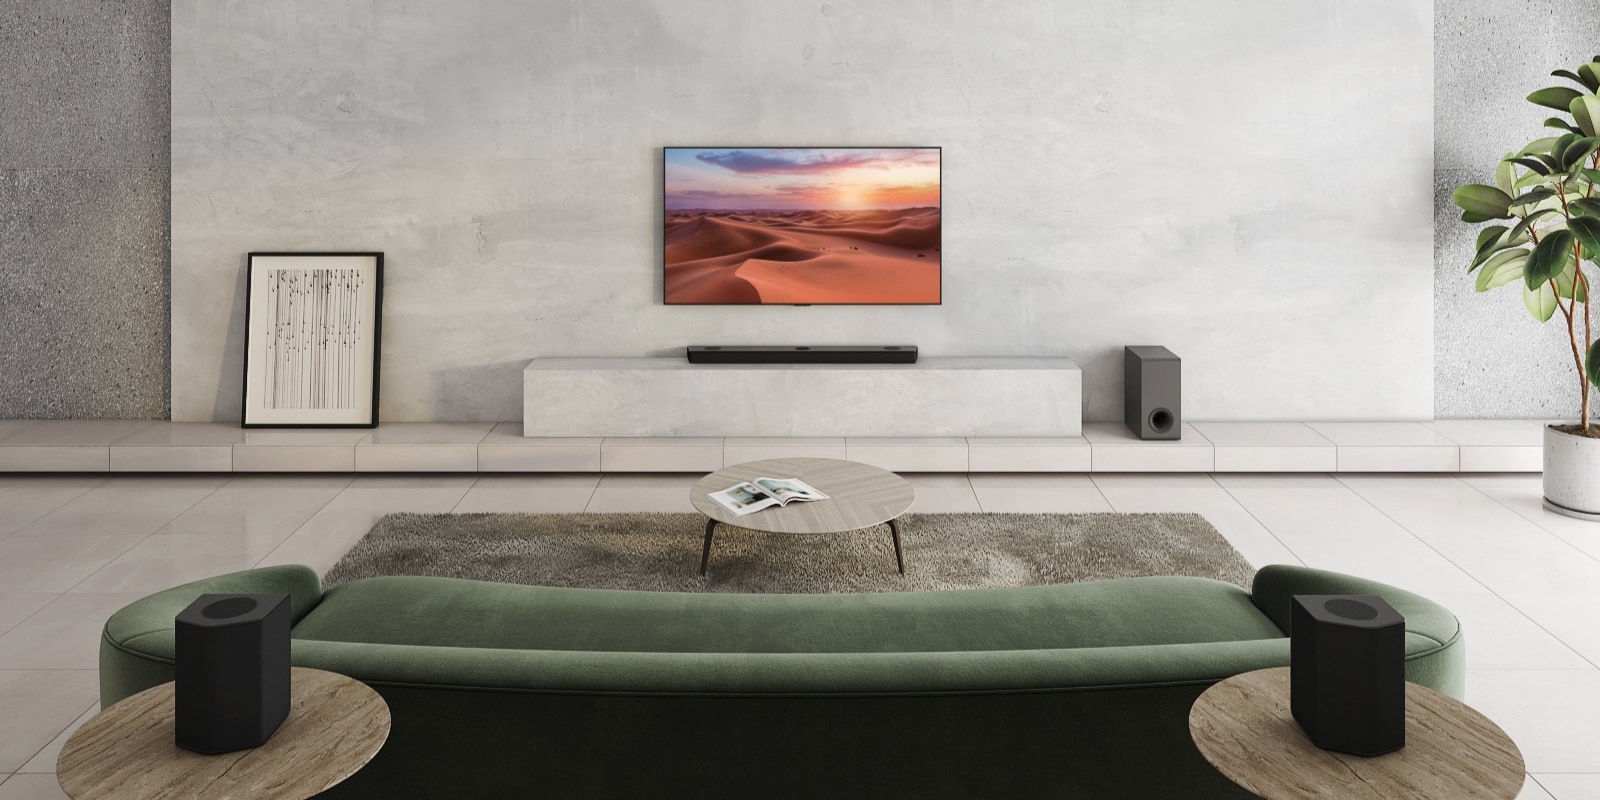 There is TV showing a nature image. A sound bar, a subwoofer, and 2 rear speakers in a wide living room. A wave with grid is coming out from sound bar, measuring the entire space of living room. 